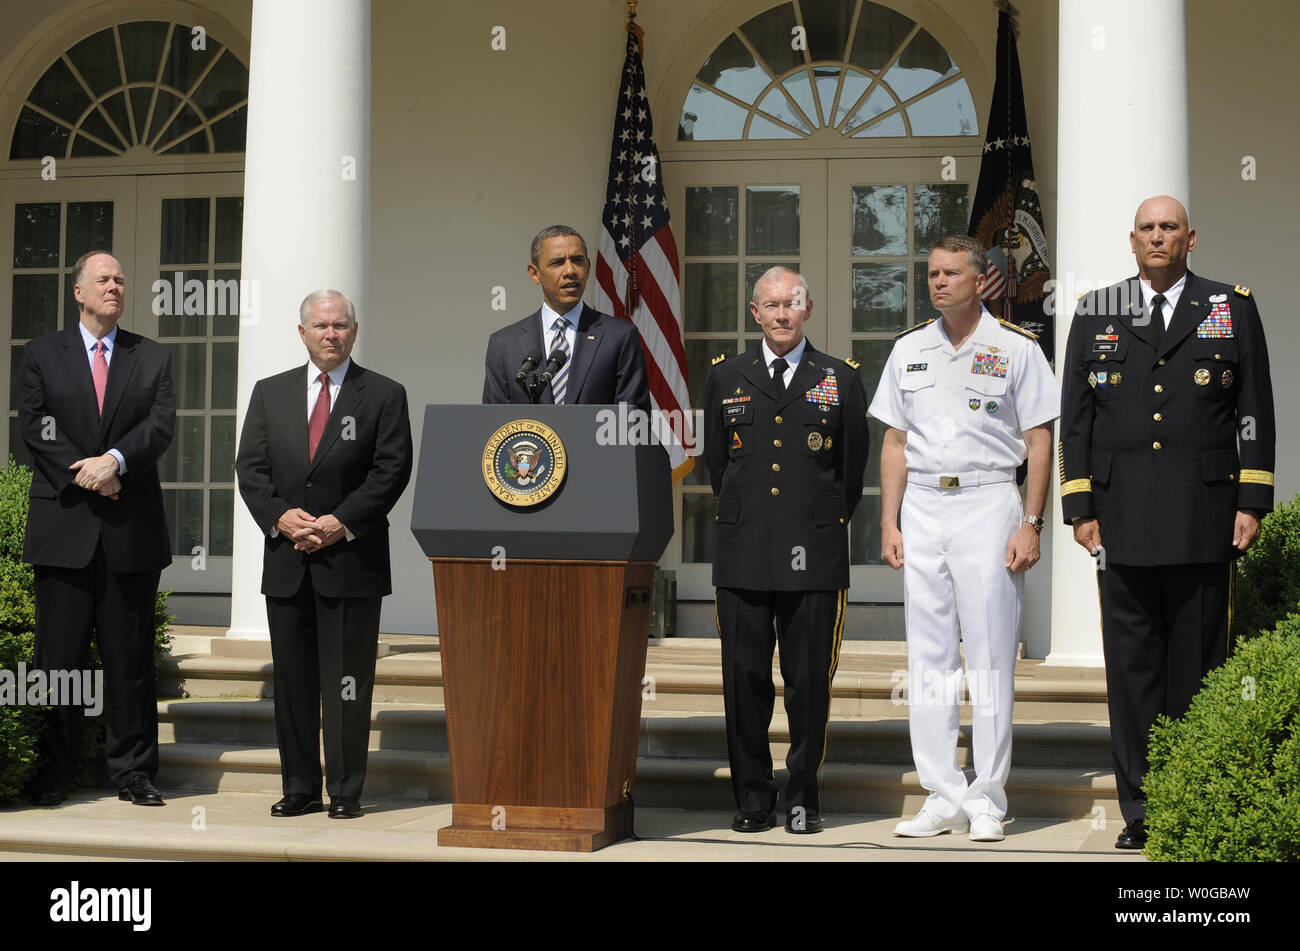 U.S. President Barack Obama makes remarks as he announces the nomination of Army Gen. Martin E. Dempsey (3rd,R) as chairman of the Joint Chiefs of Staff, May 30, 2011 in the Rose Garden of the White House, in Washington, D.C. Also attending (L-R) National Security Advisor Tom Donilon, Defense Secretary Robert Gates, Adm. James Alexander 'Sandy' Winnefeld, Jr. and Gen. Raymond Odierno. Dempsey, who will replace out-going Adm. Mike Mullen, will be the military's highest ranking officer and oversee the drawdowns in Iraq and Afghanistan, defense budget cuts and the future role of the armed forces. Stock Photo